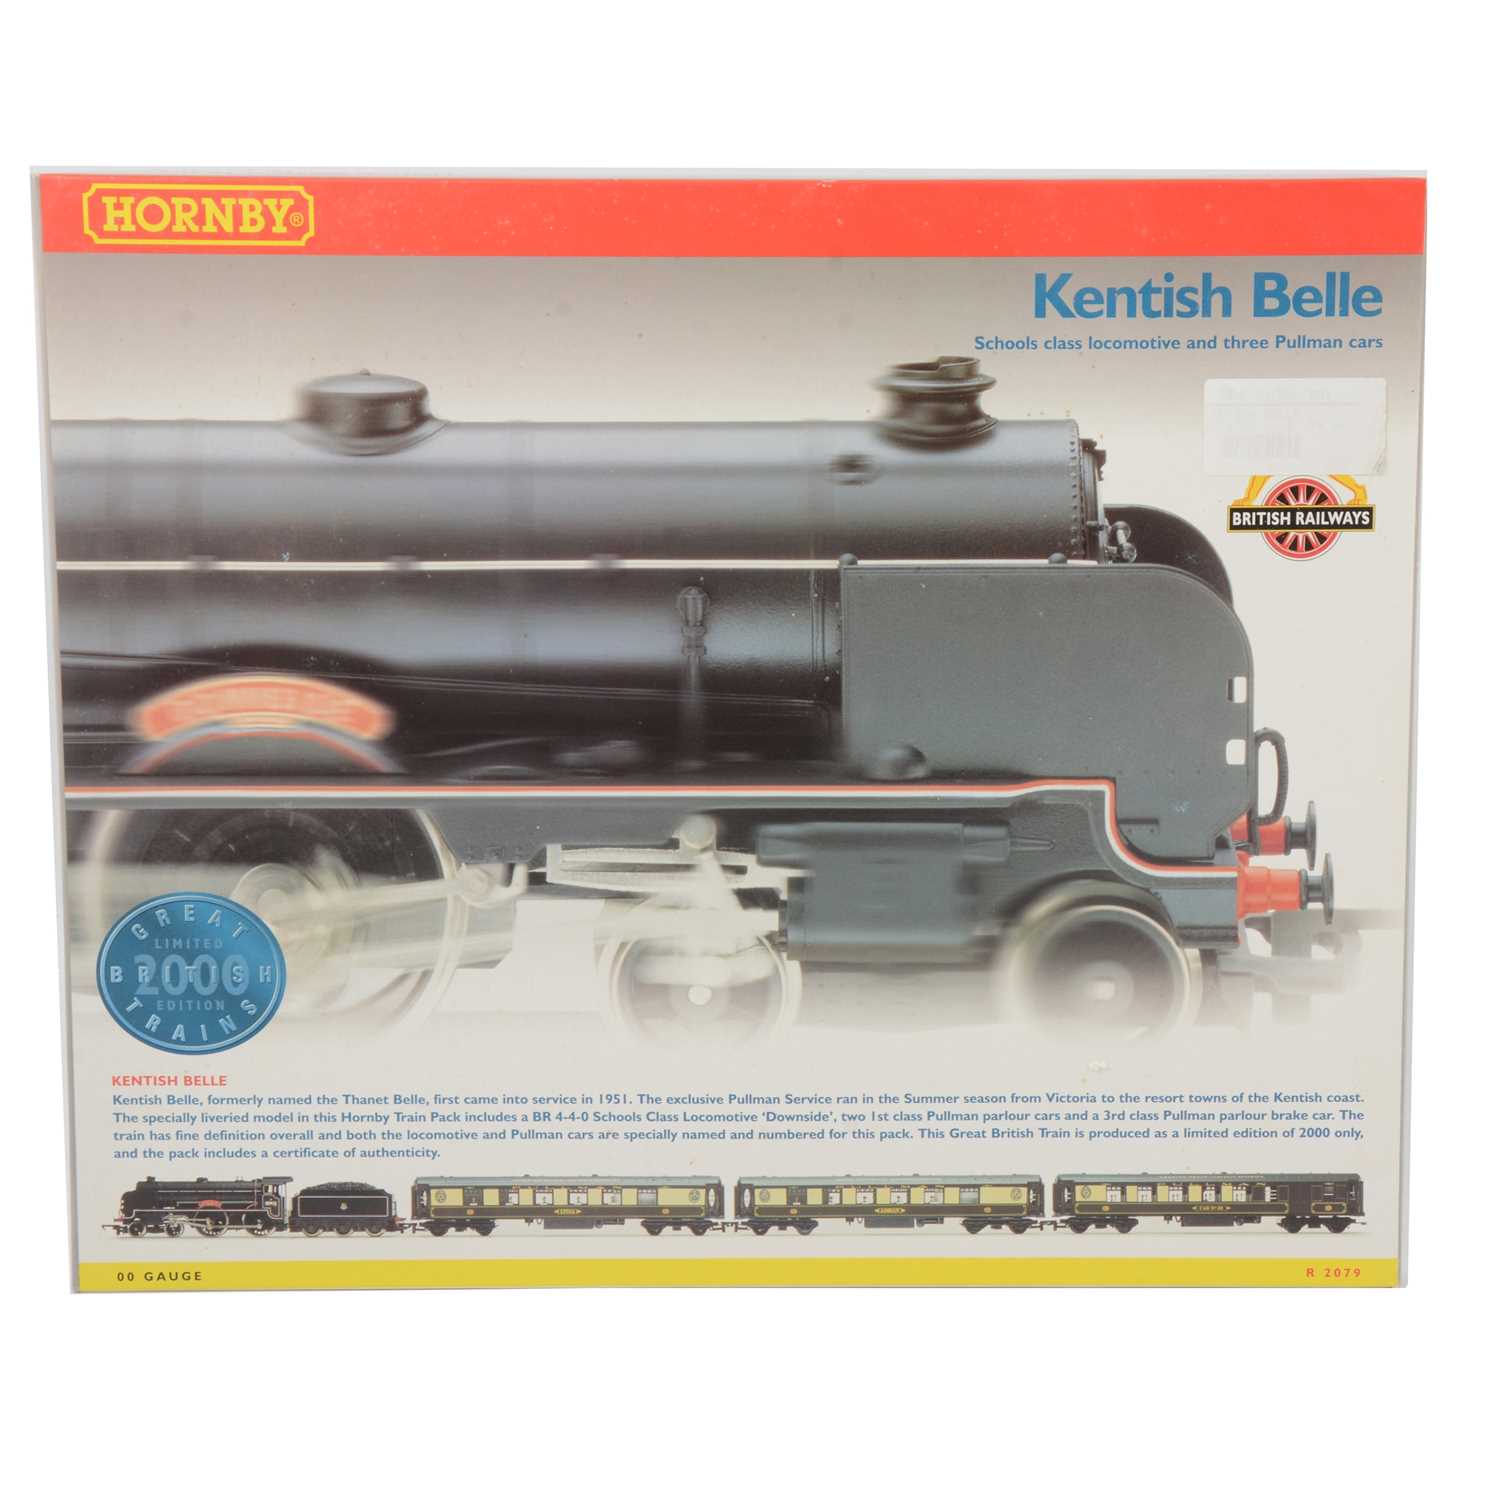 Lot 53 - Hornby OO gauge model railway limited edition train pack R2079 'Kentish Belle', boxed.